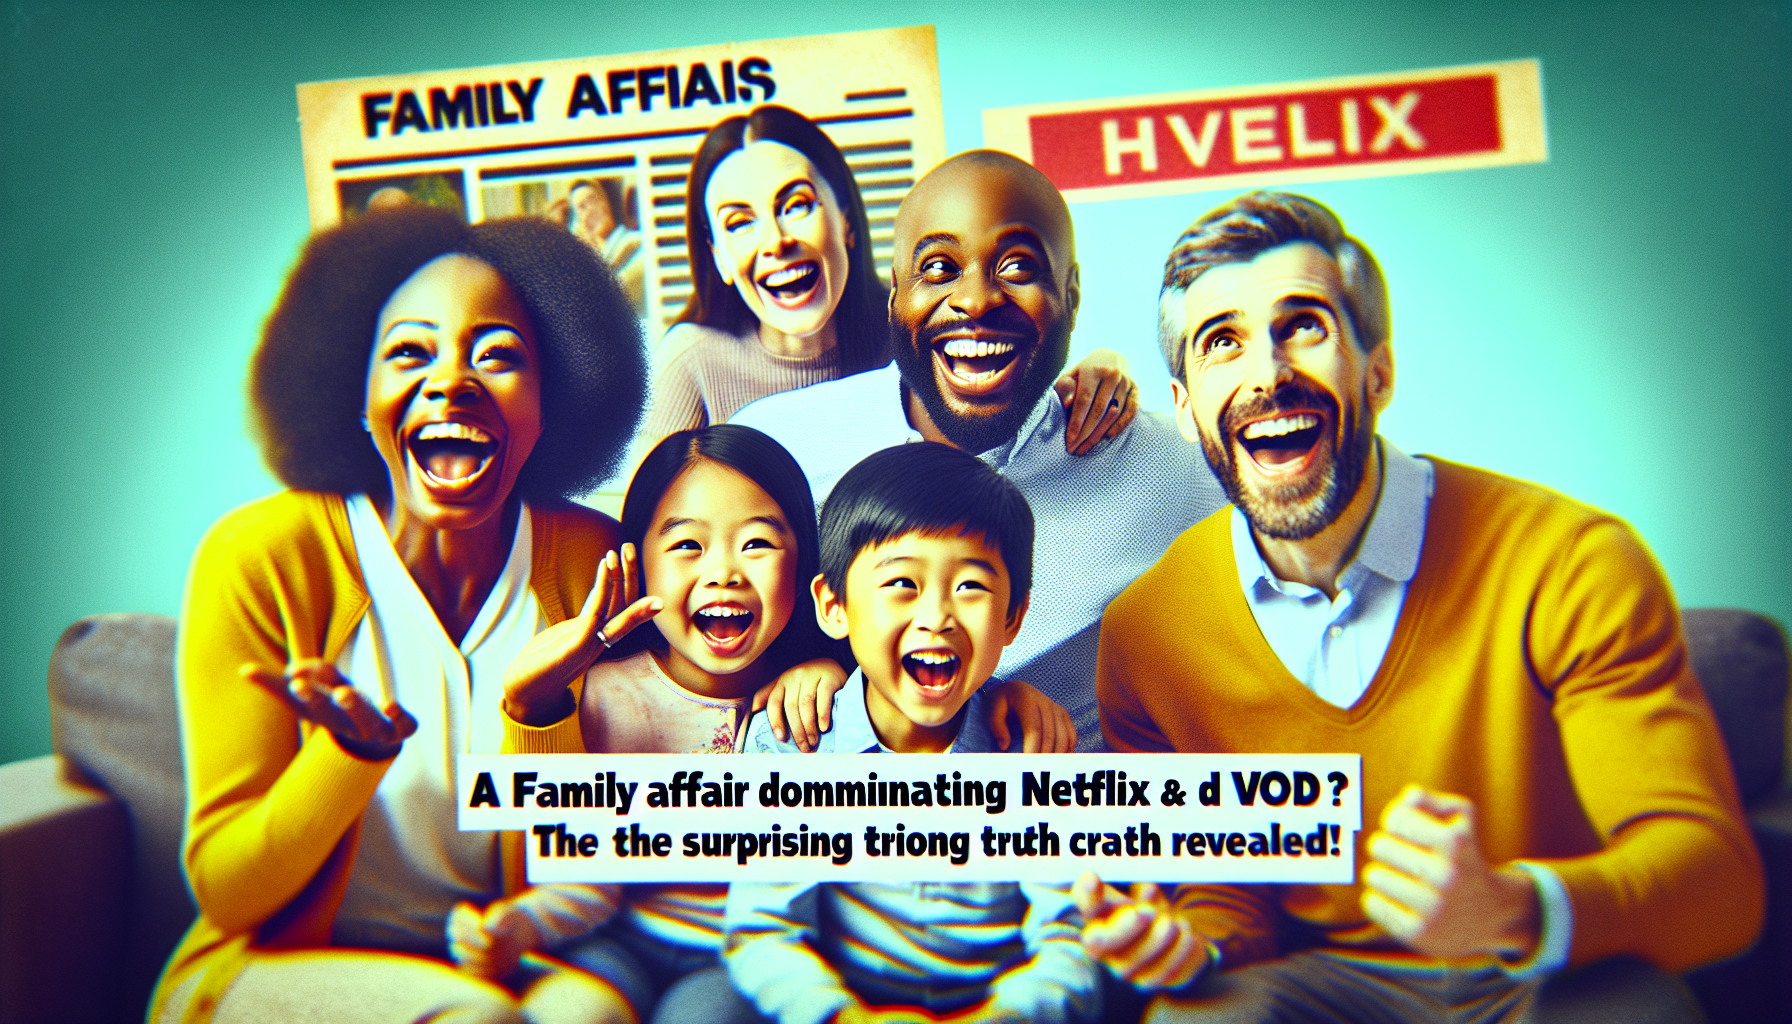 discover the surprising truth about whether 'a family affair' is dominating netflix and vod charts. get the facts here!